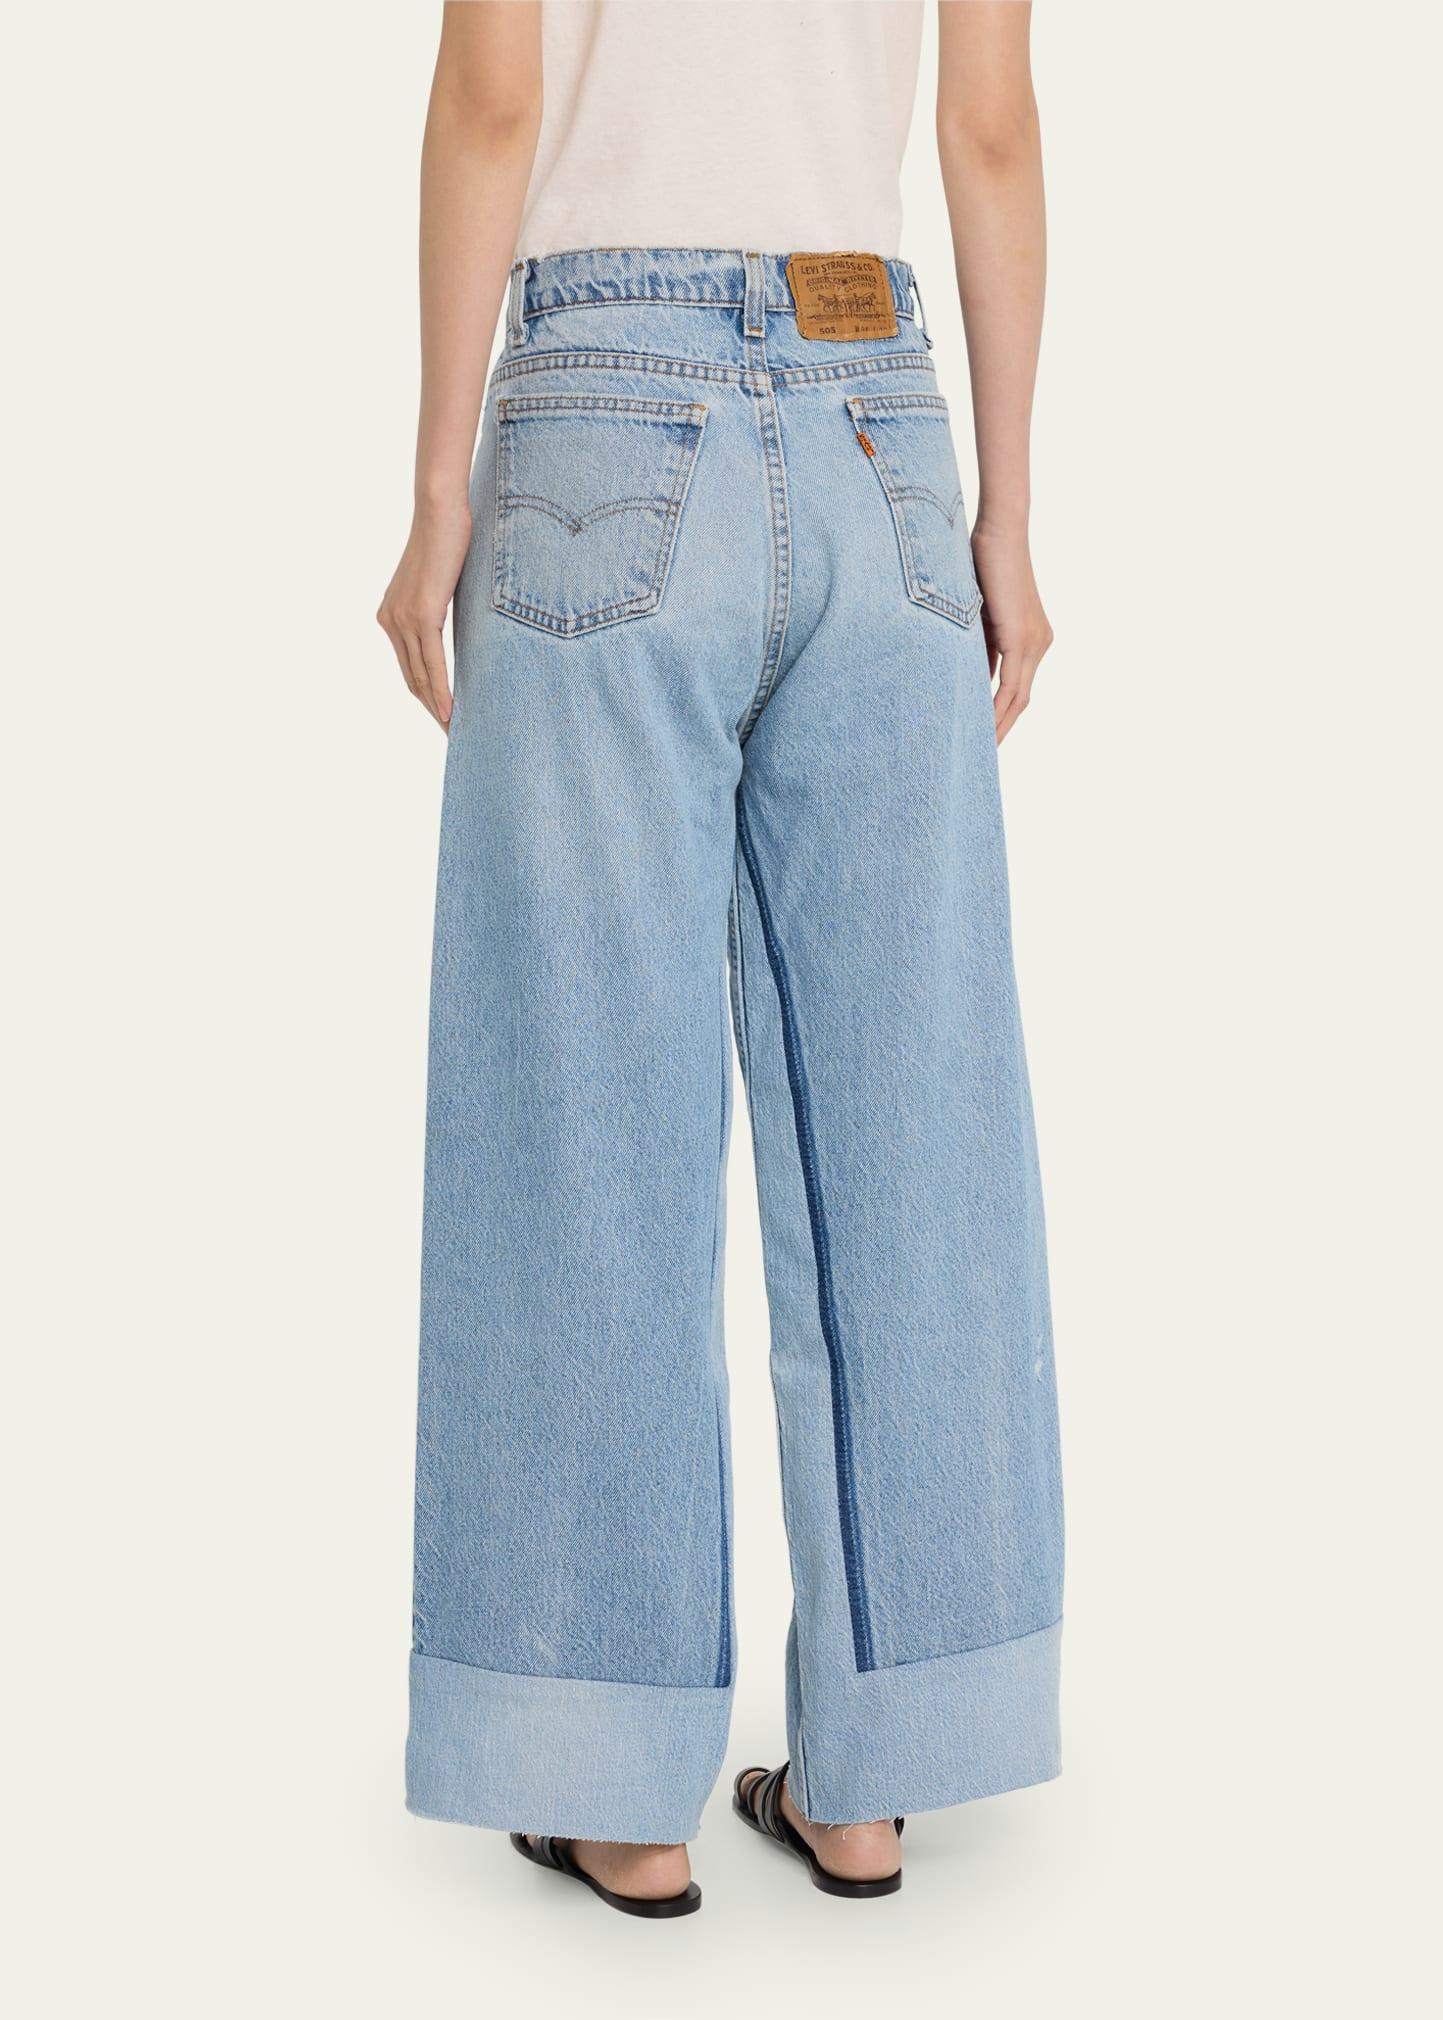 B Sides Reworked Culotte Jeans in Blue | Lyst